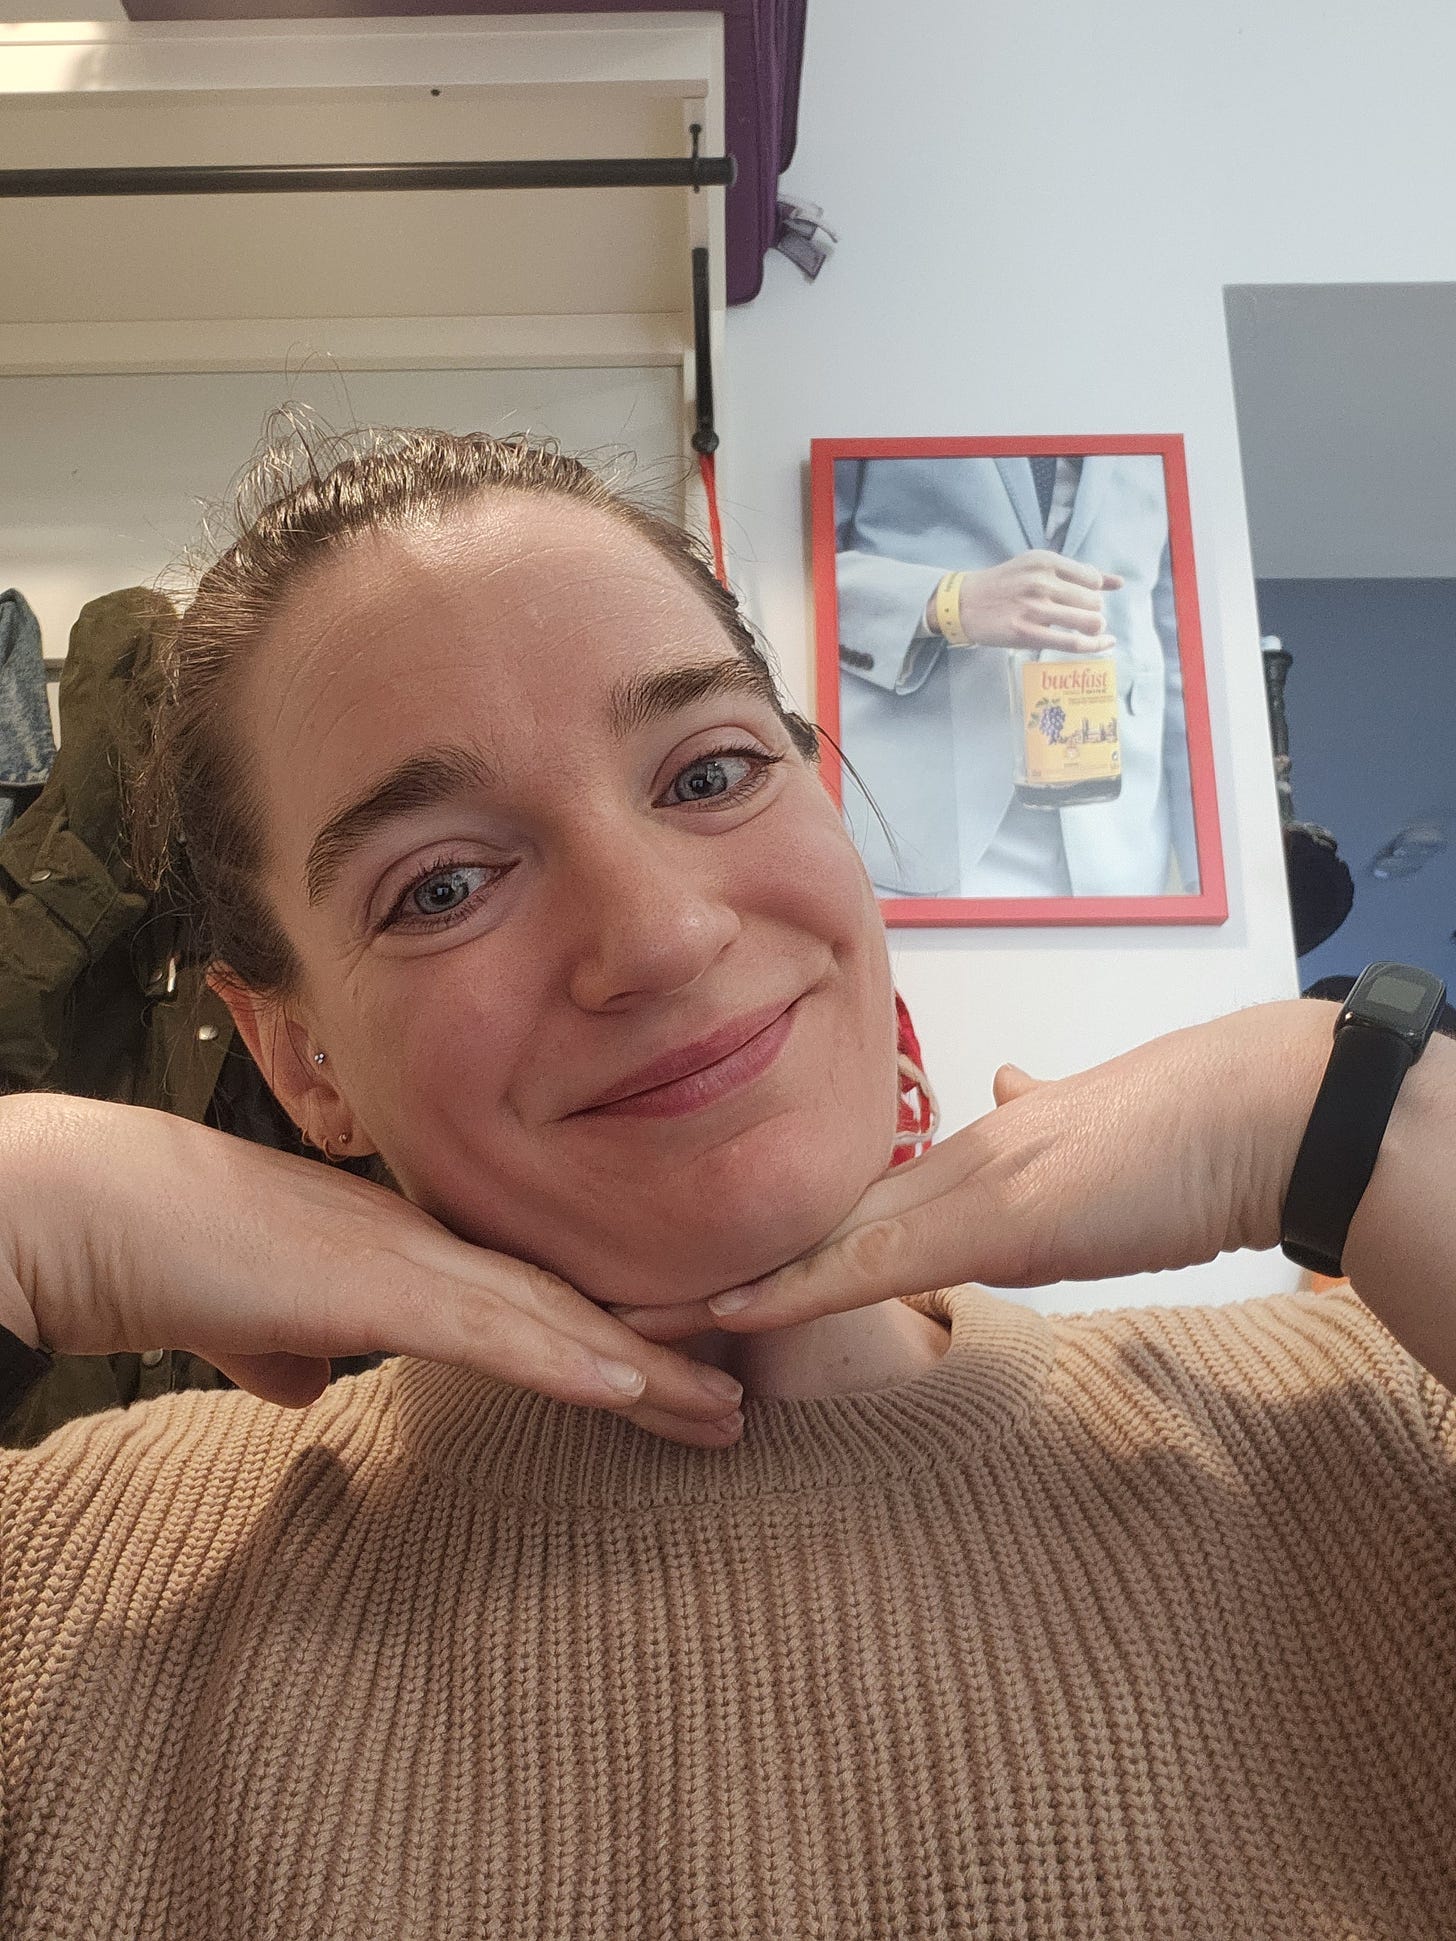 Smiling like an angel, and with two hands posed under my face like a child star, this is a selfie. My hair is pulled back into a bun, and behind me a framed poster of a Buckfast bottle looks on. 